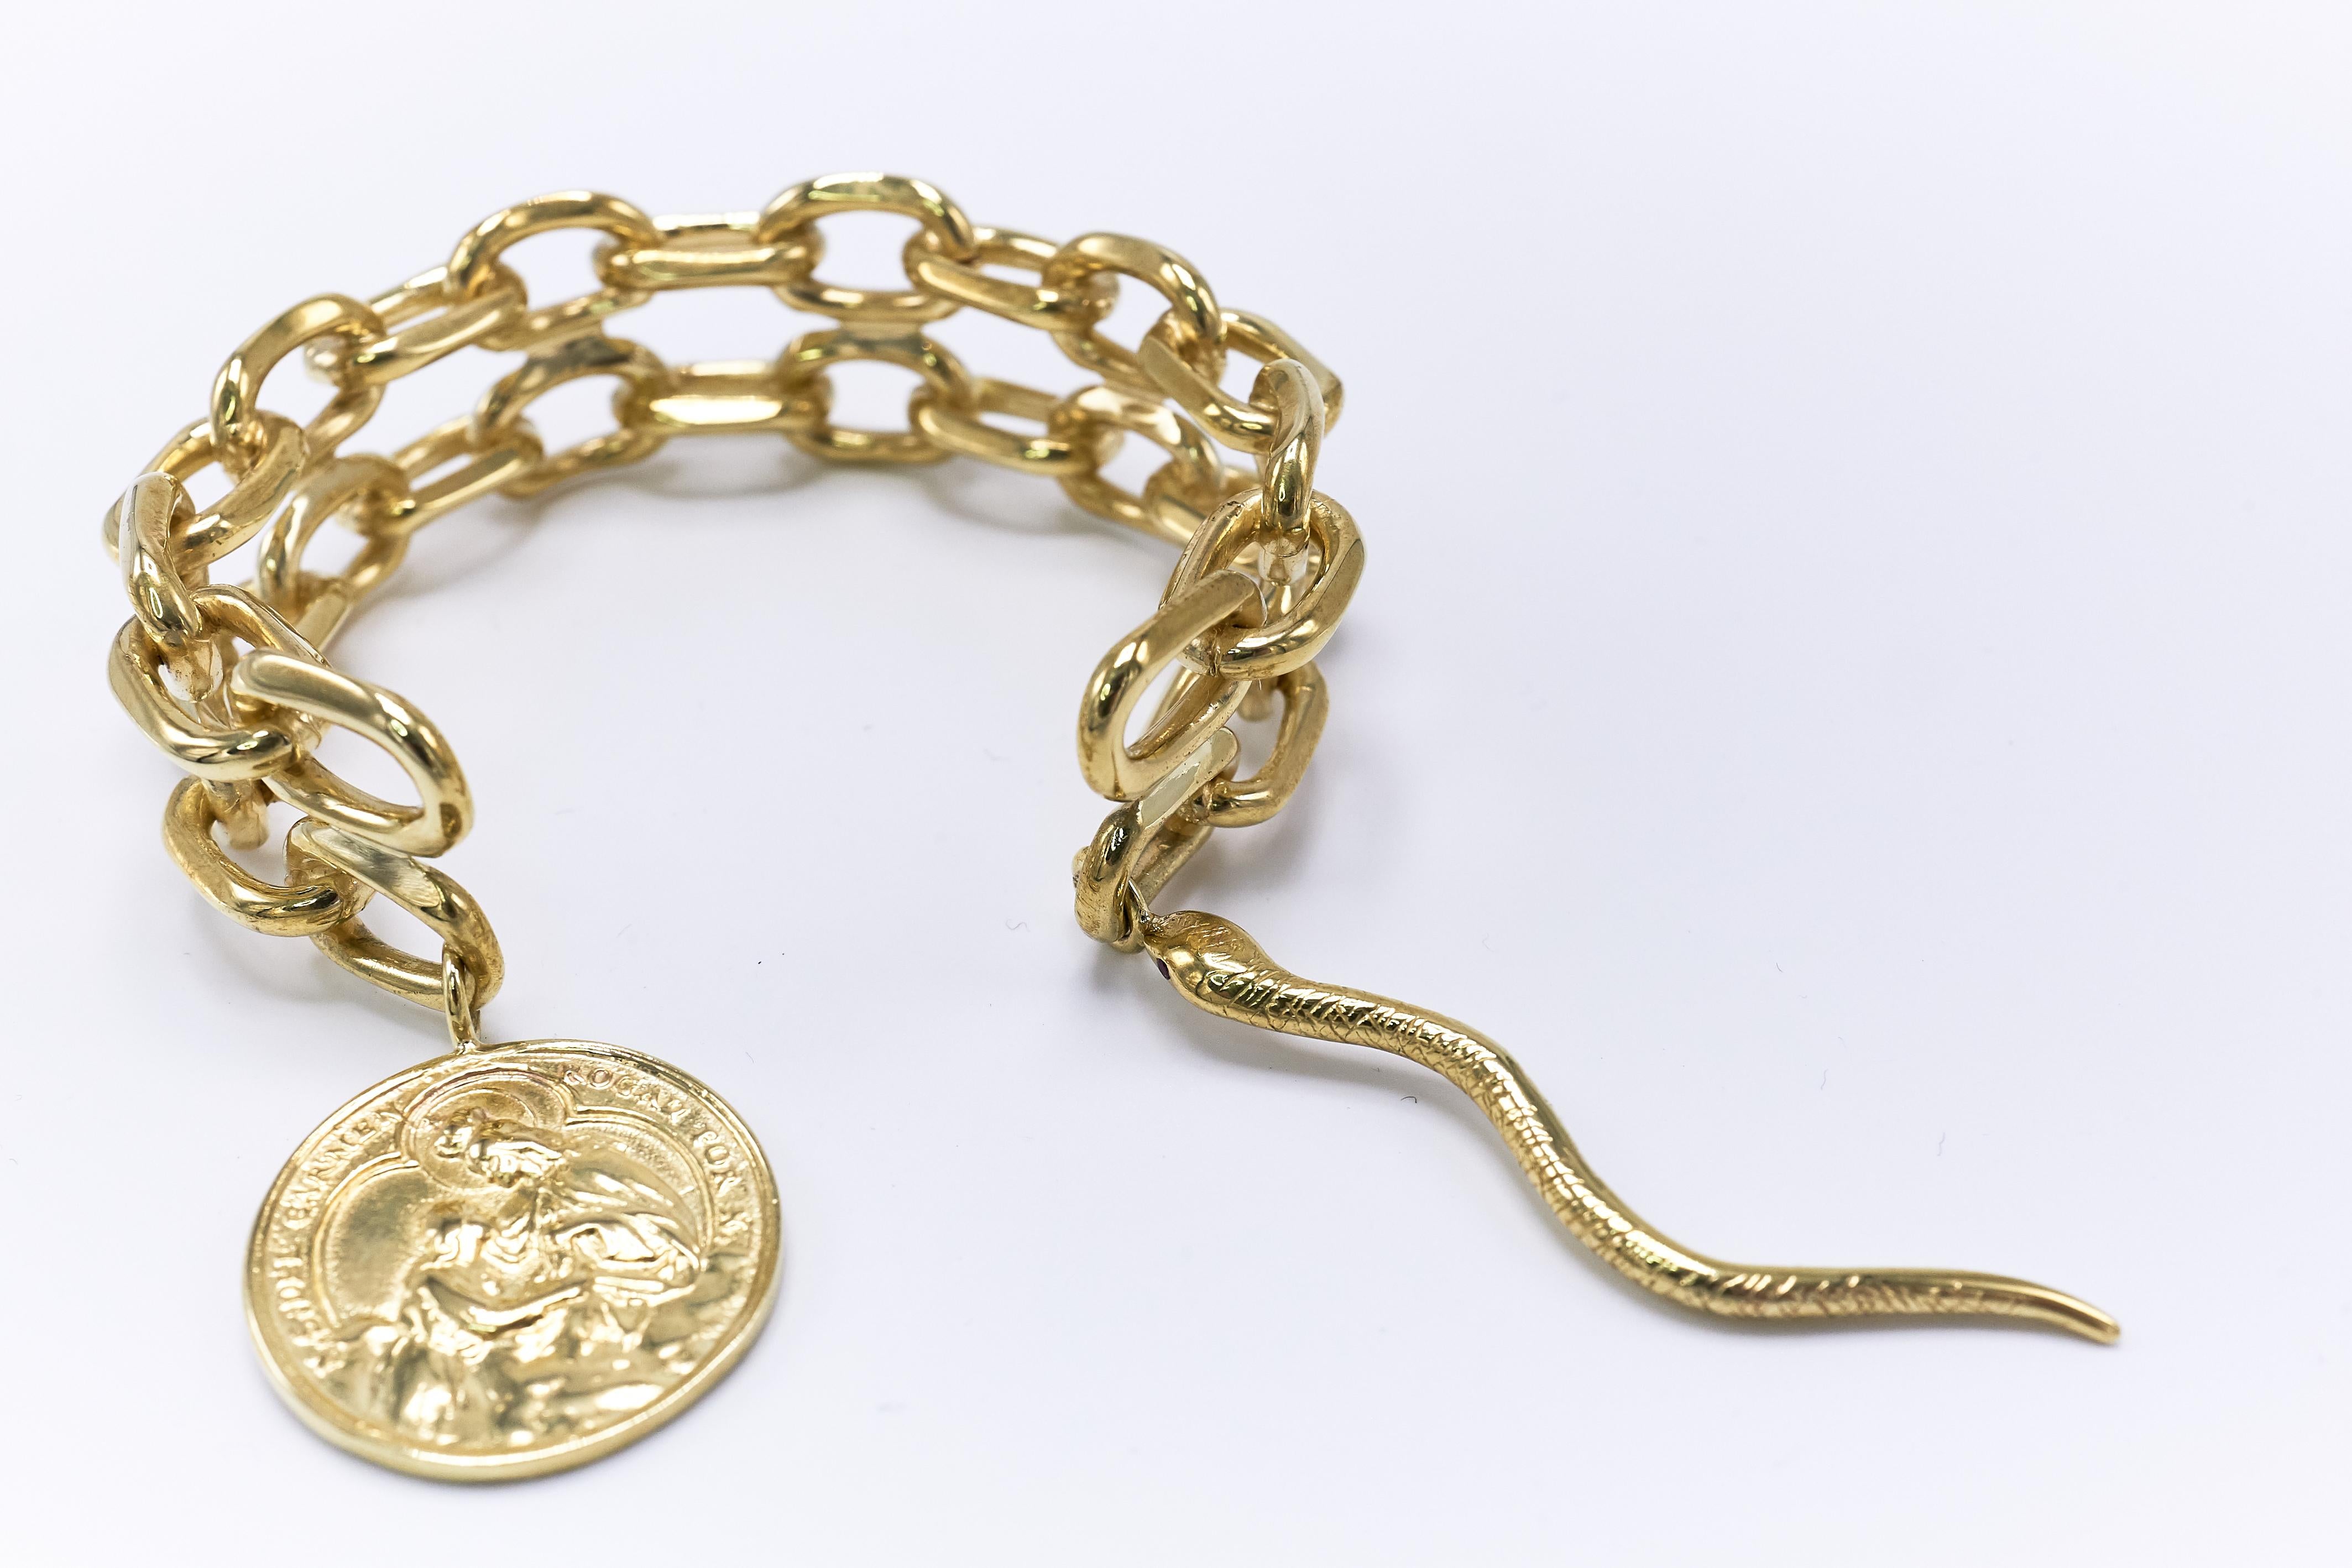 Statement Chunky Chain Cuff Bangle Bracelet Medal Bronze J Dauphin In New Condition For Sale In Los Angeles, CA